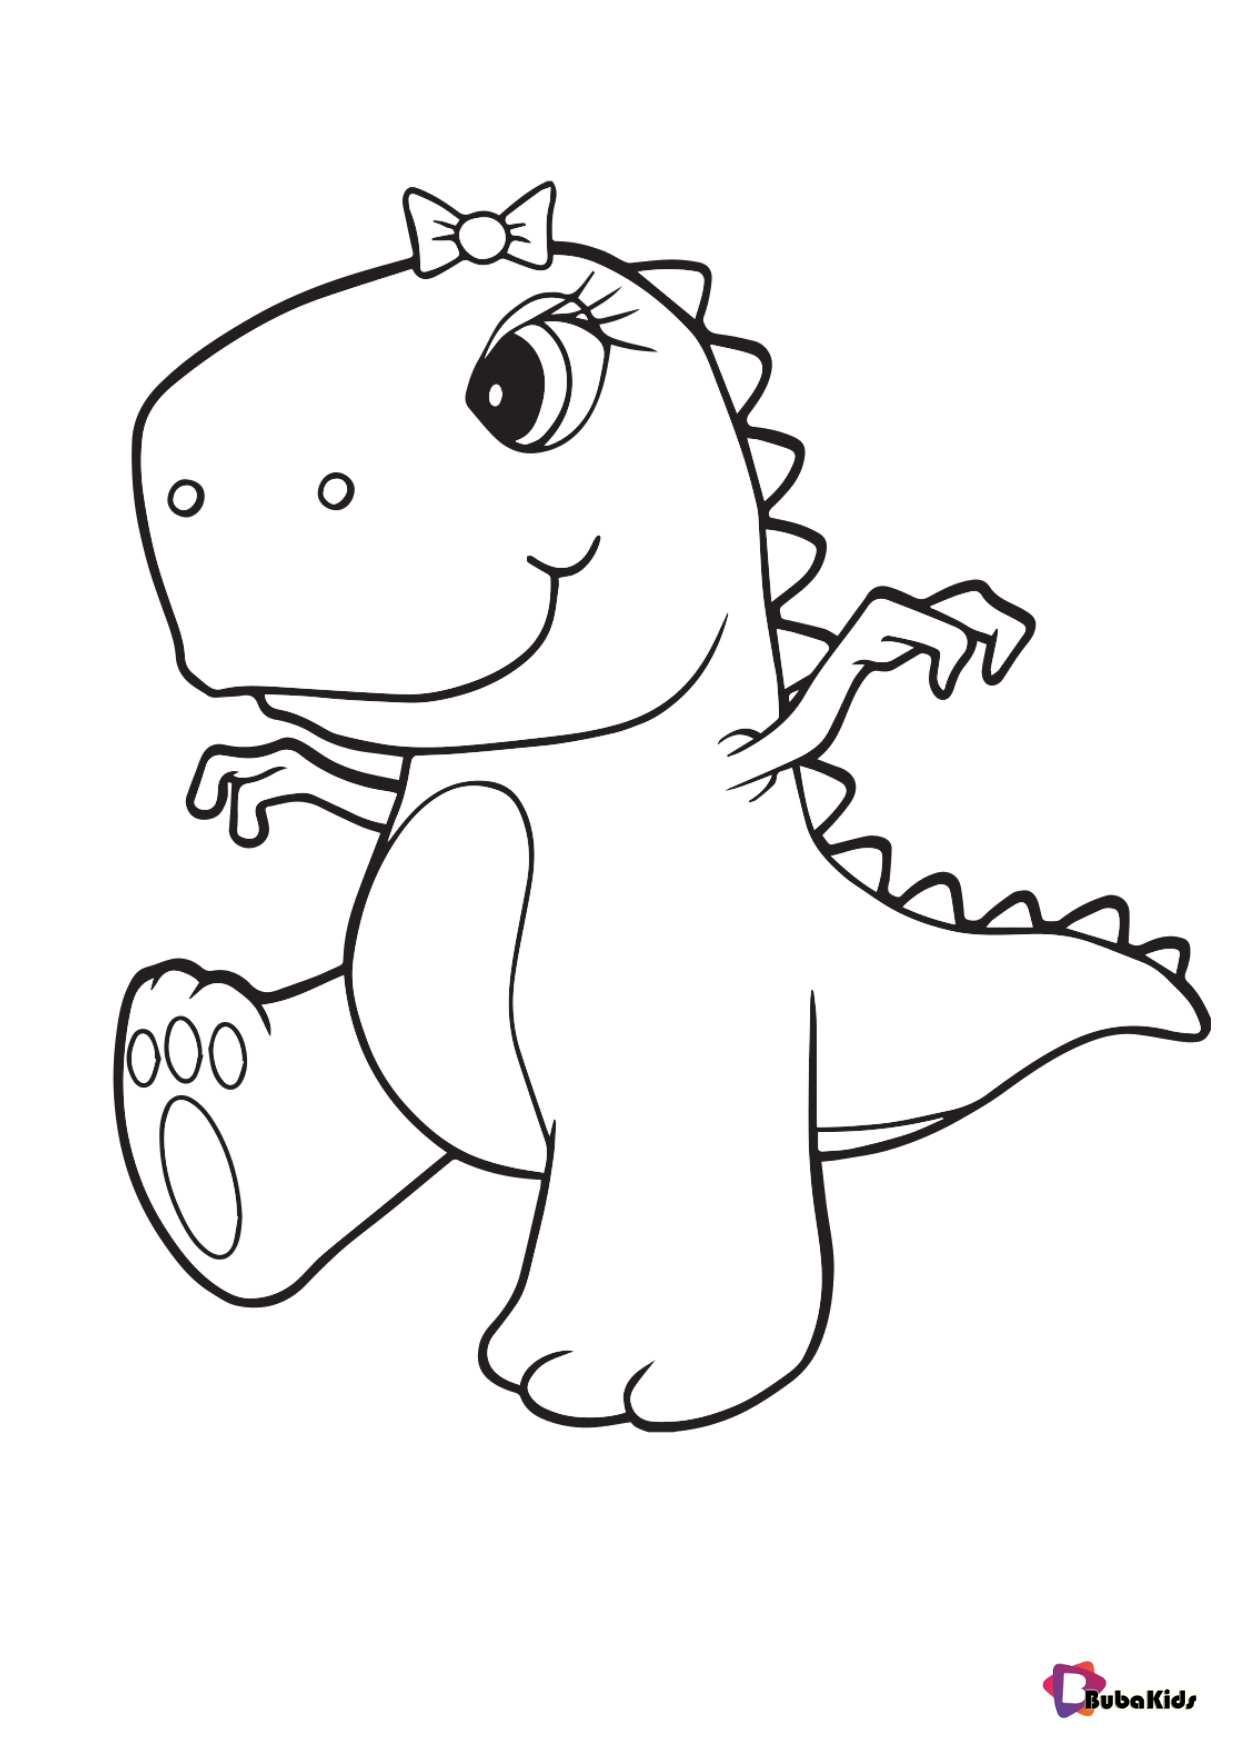 Cute little dinosaur baby colouring pages Wallpaper